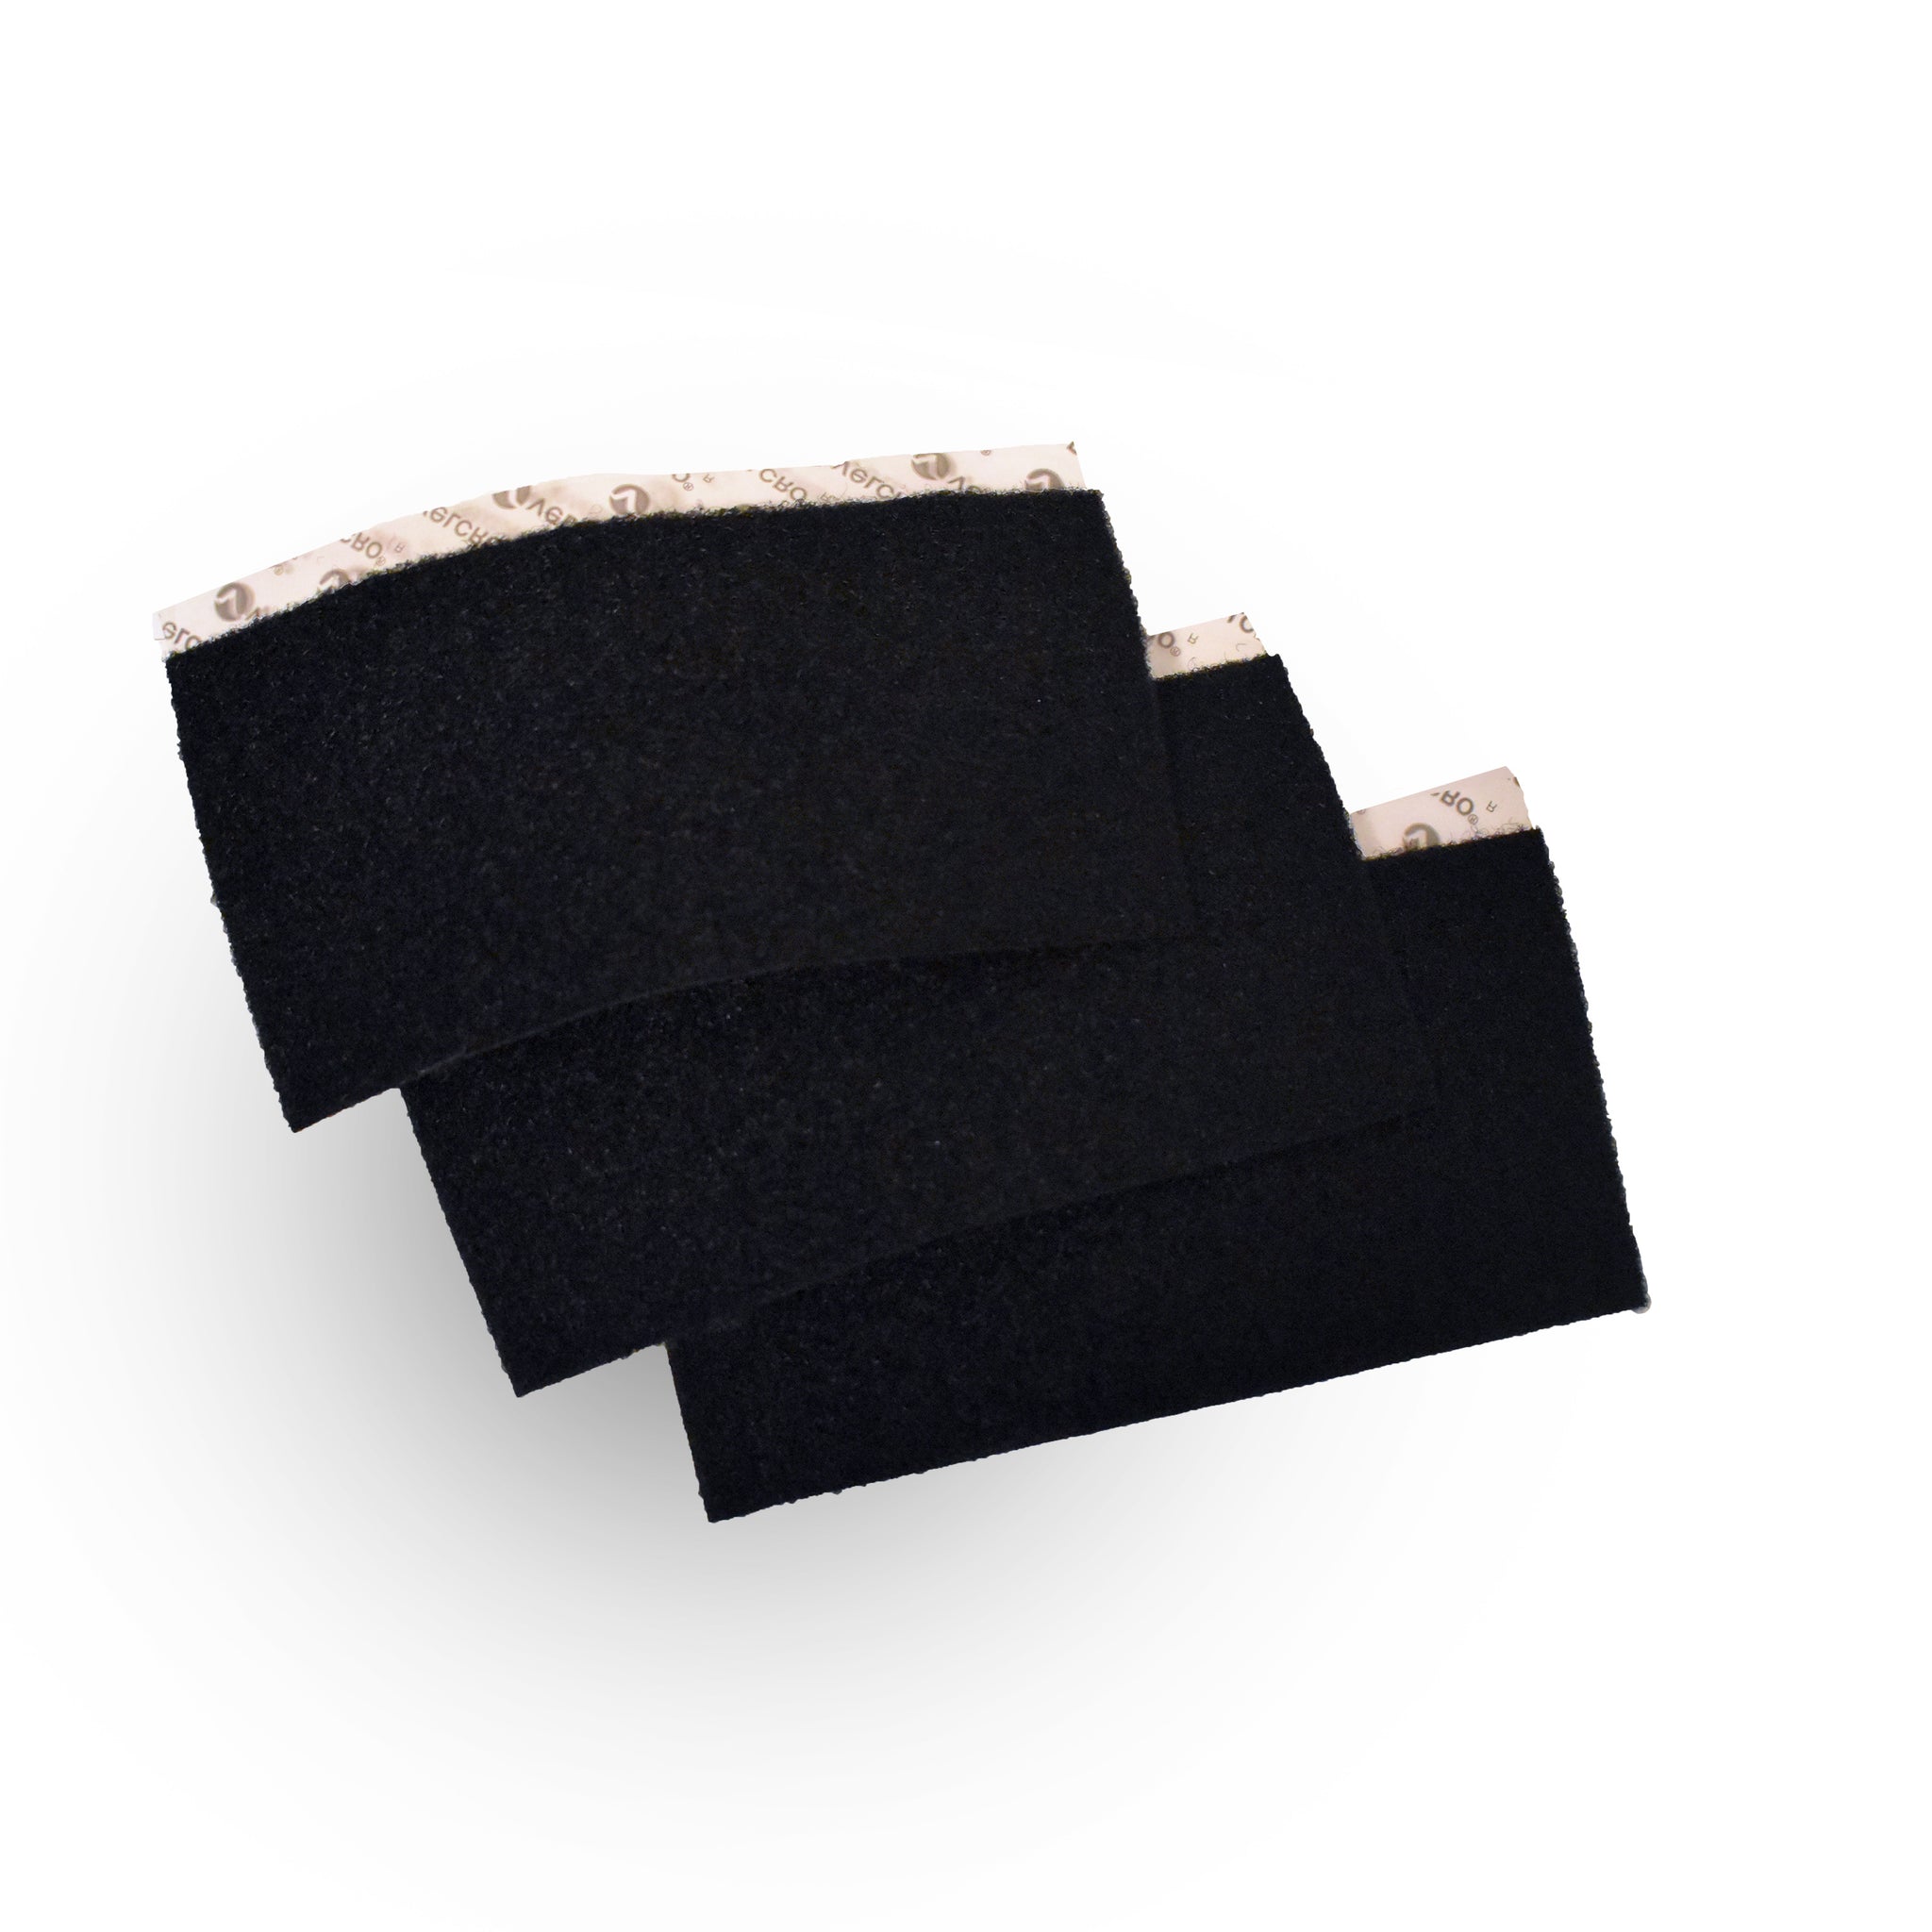 Adhesive Loop Patch - Pirate Fly Fishing